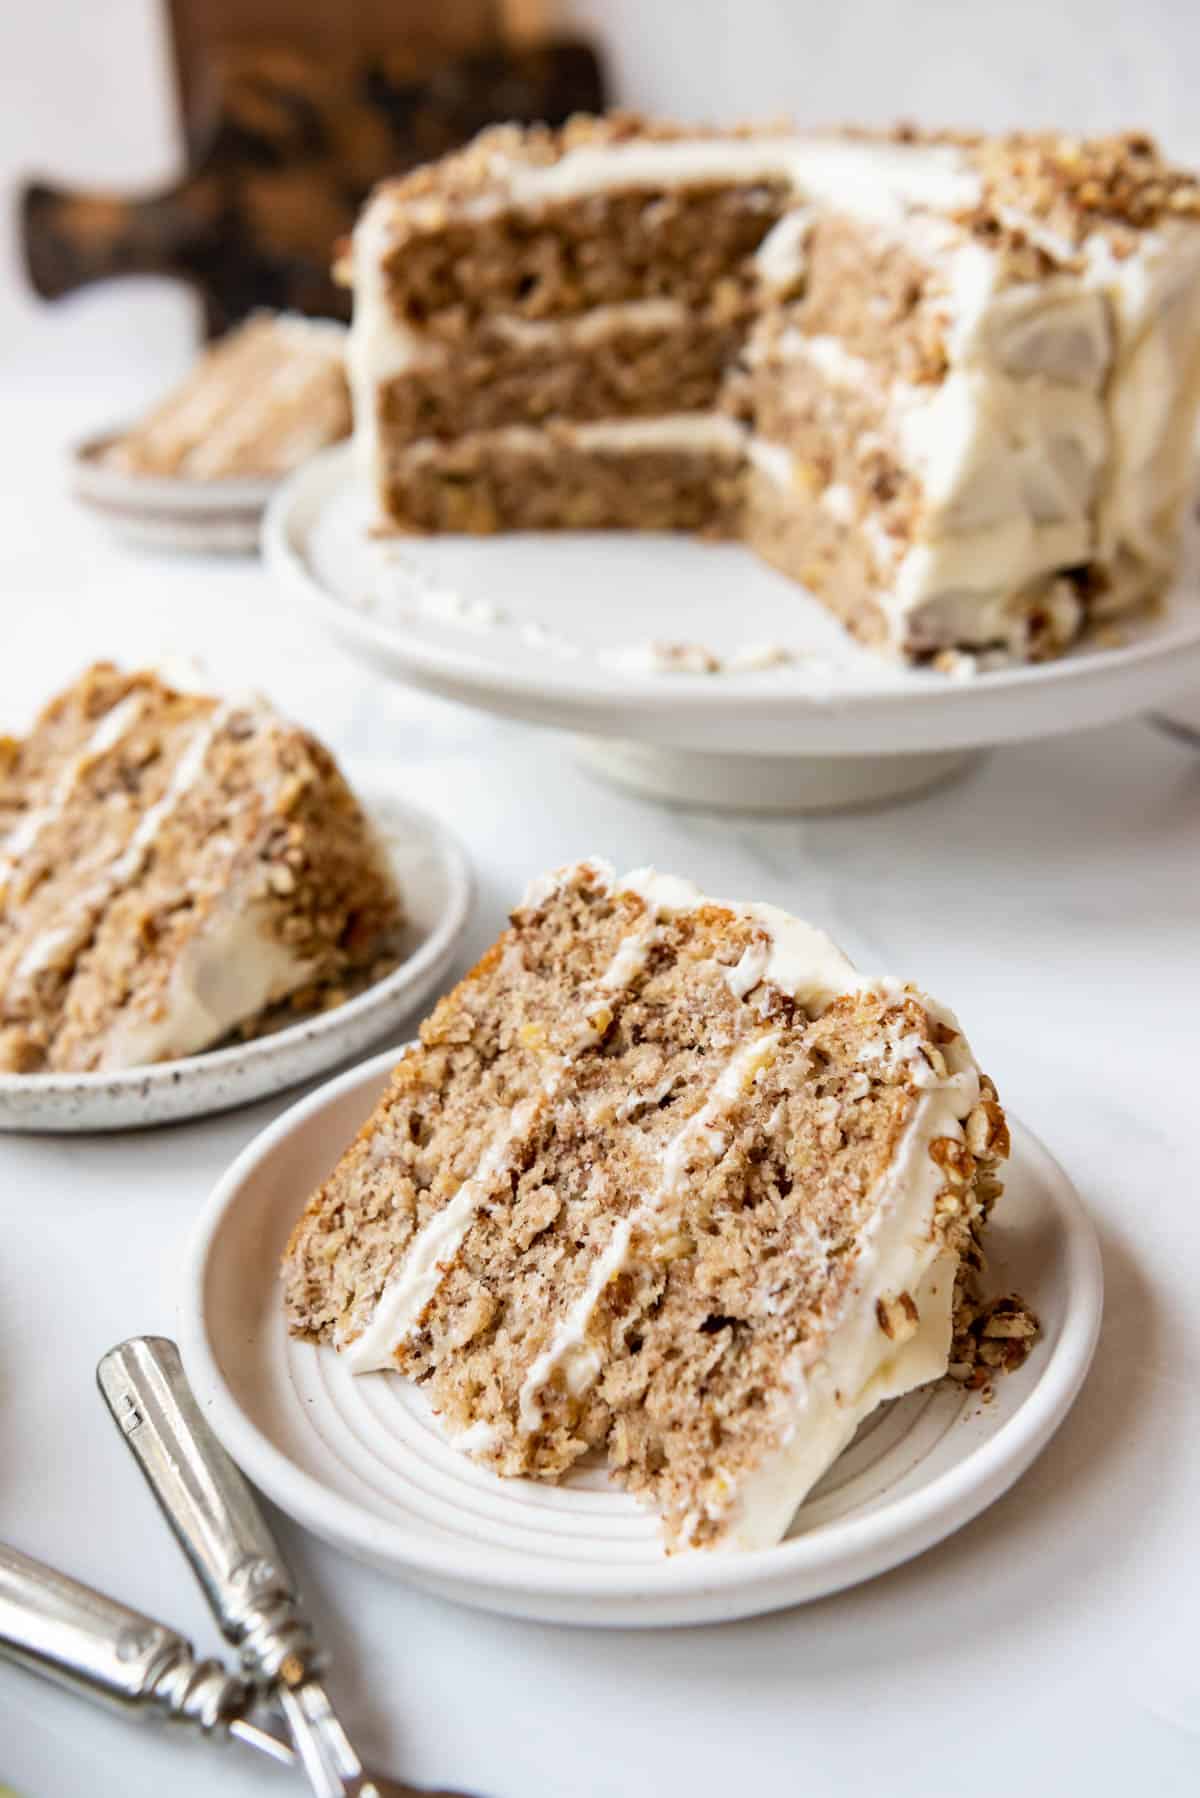 Slices of hummingbird cake on plates in front of the rest of the cake on a cake stand.